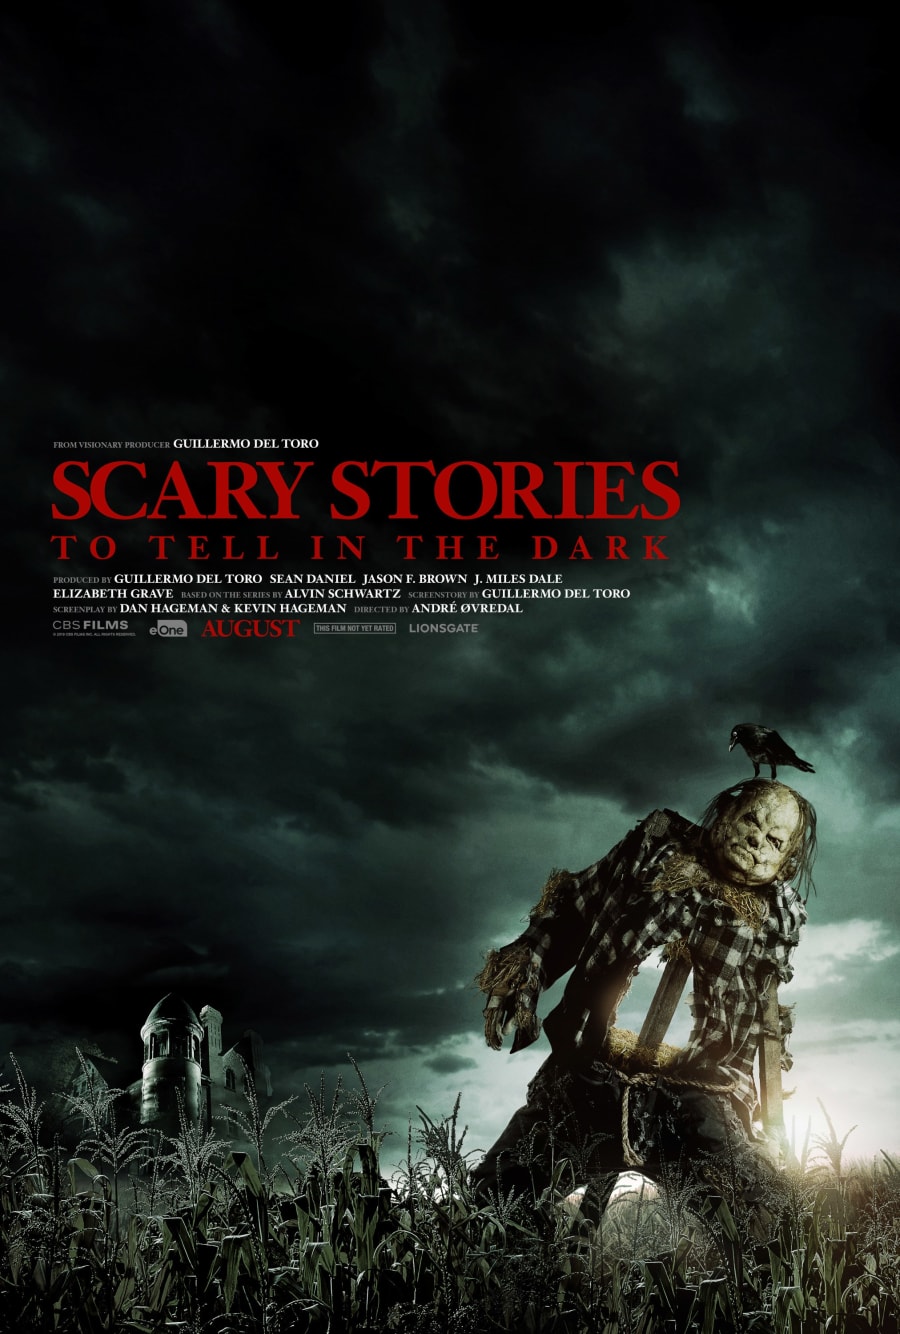 All About Scary Stories To Tell In The Dark